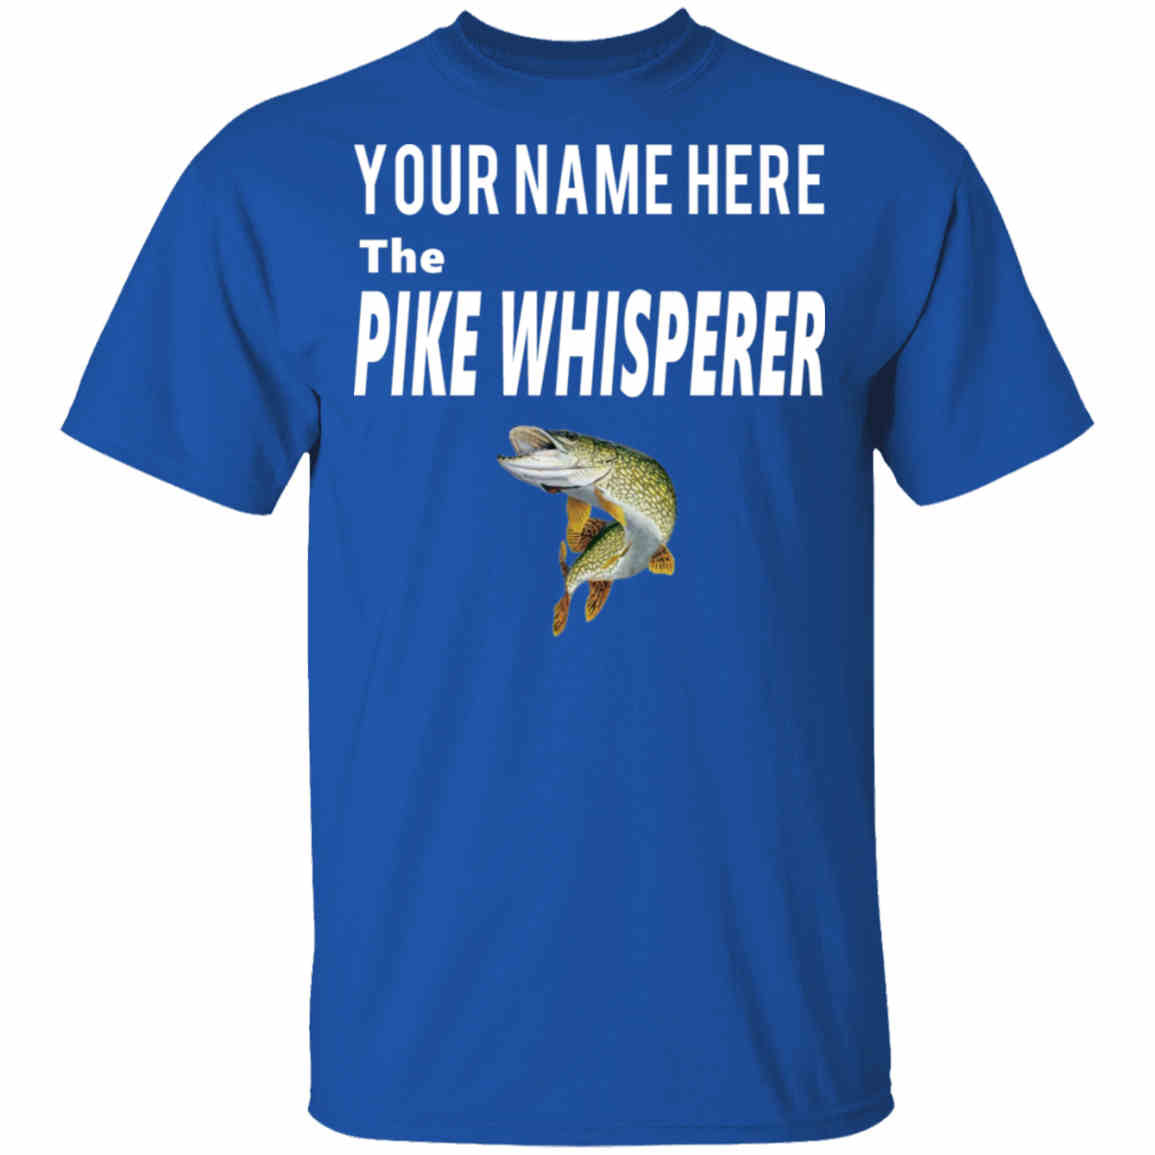 Personalized the pike whisperer t-shirt w royal